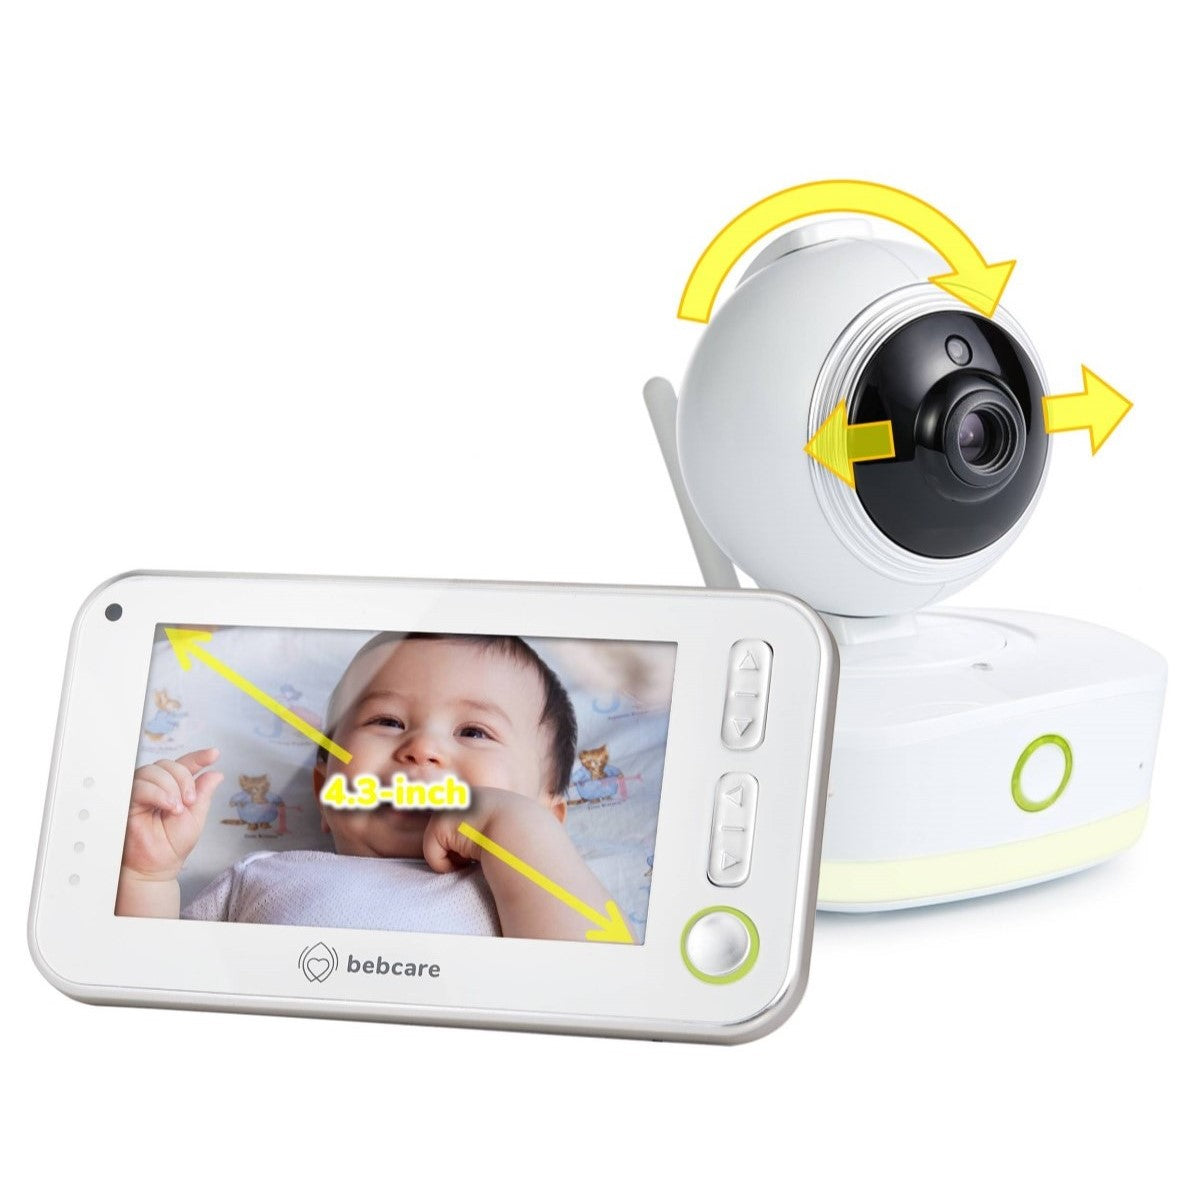 Bebcare Motion 4.3-inch Low Emissions Digital Video Baby Monitor with 2-way talk, Music Lullaby, Multiple Camera Support, Split Screen Mode, Pan-and-Tilt Camera, Unhackable